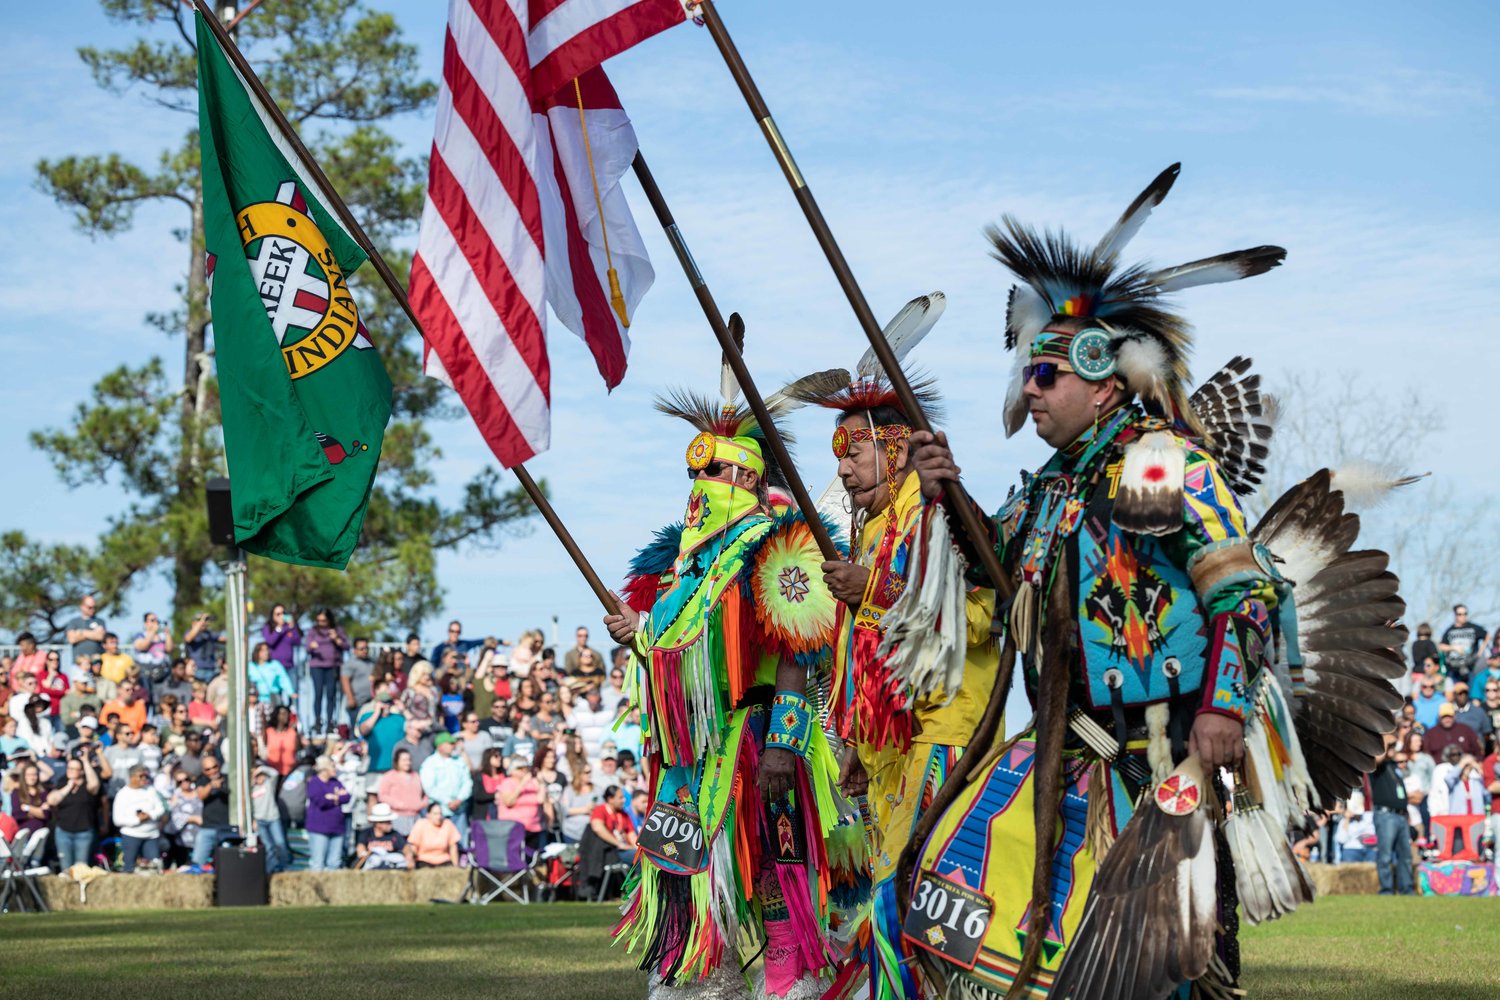 This year marks the 50th anniversary of the annual Pow Wow which got its start in 1971 as a homecoming celebration for Tribal members.